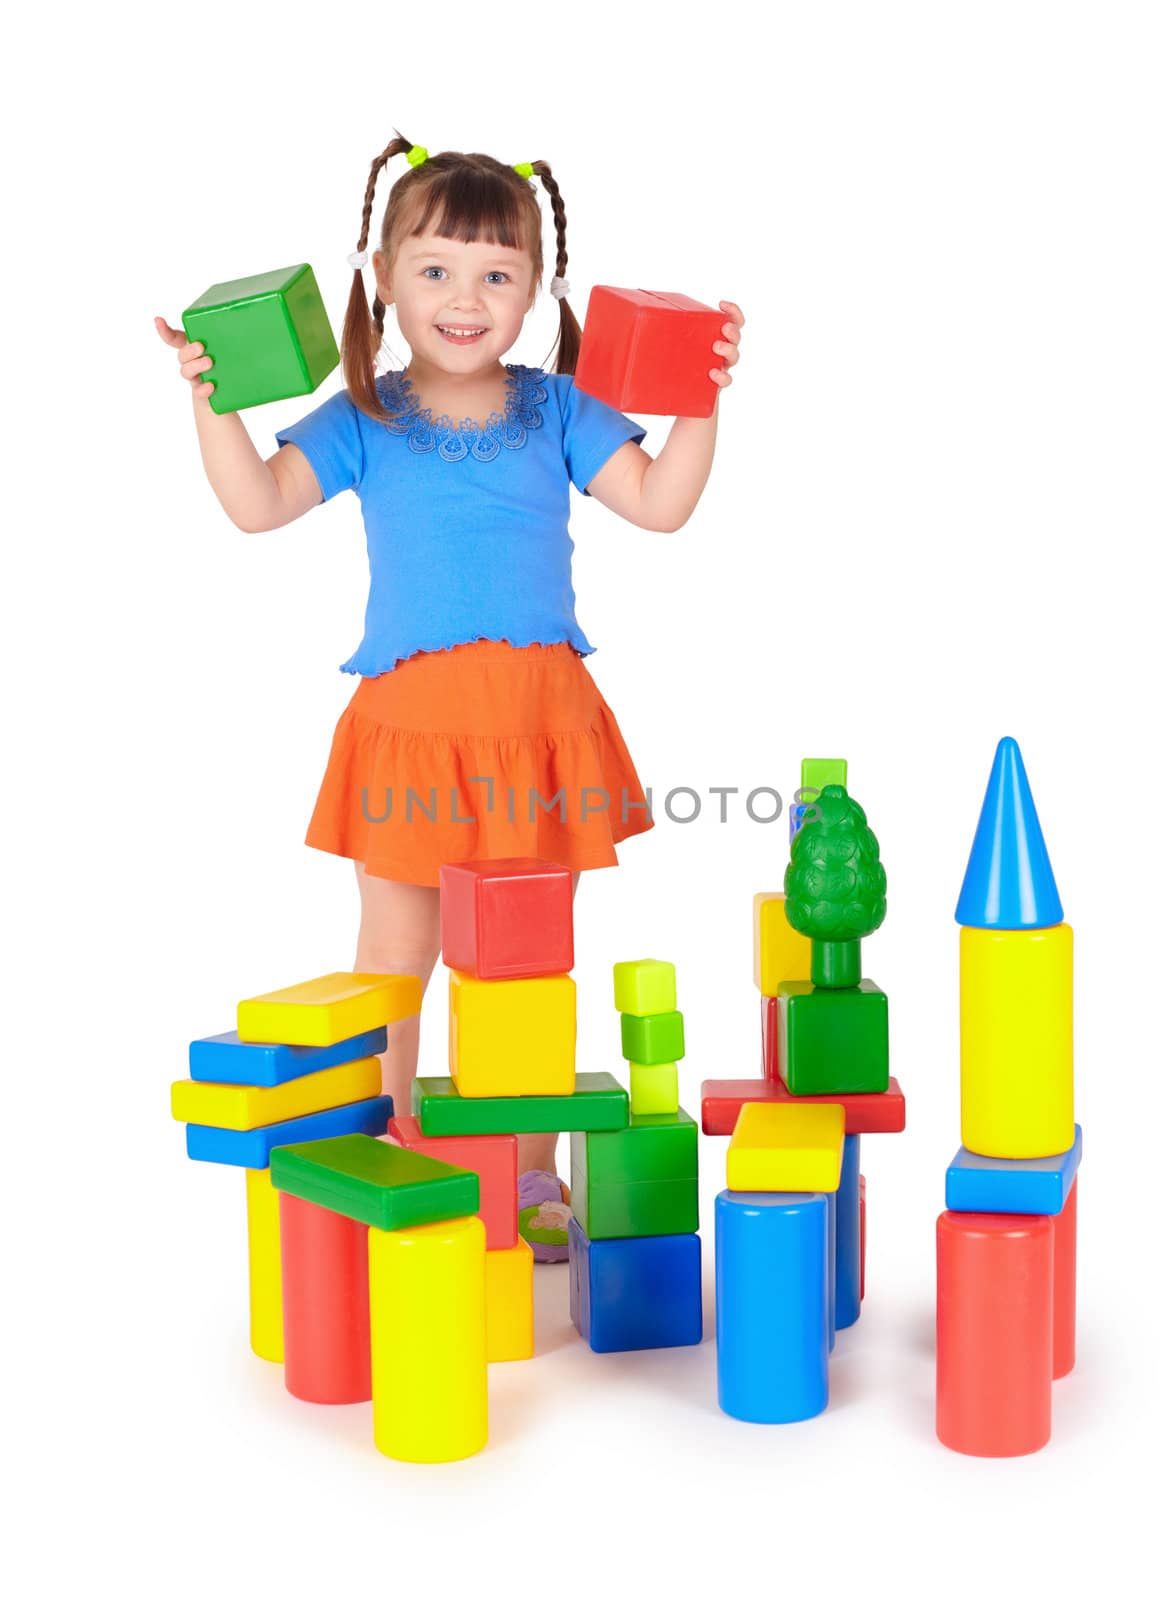 The little girl is playing with colored blocks